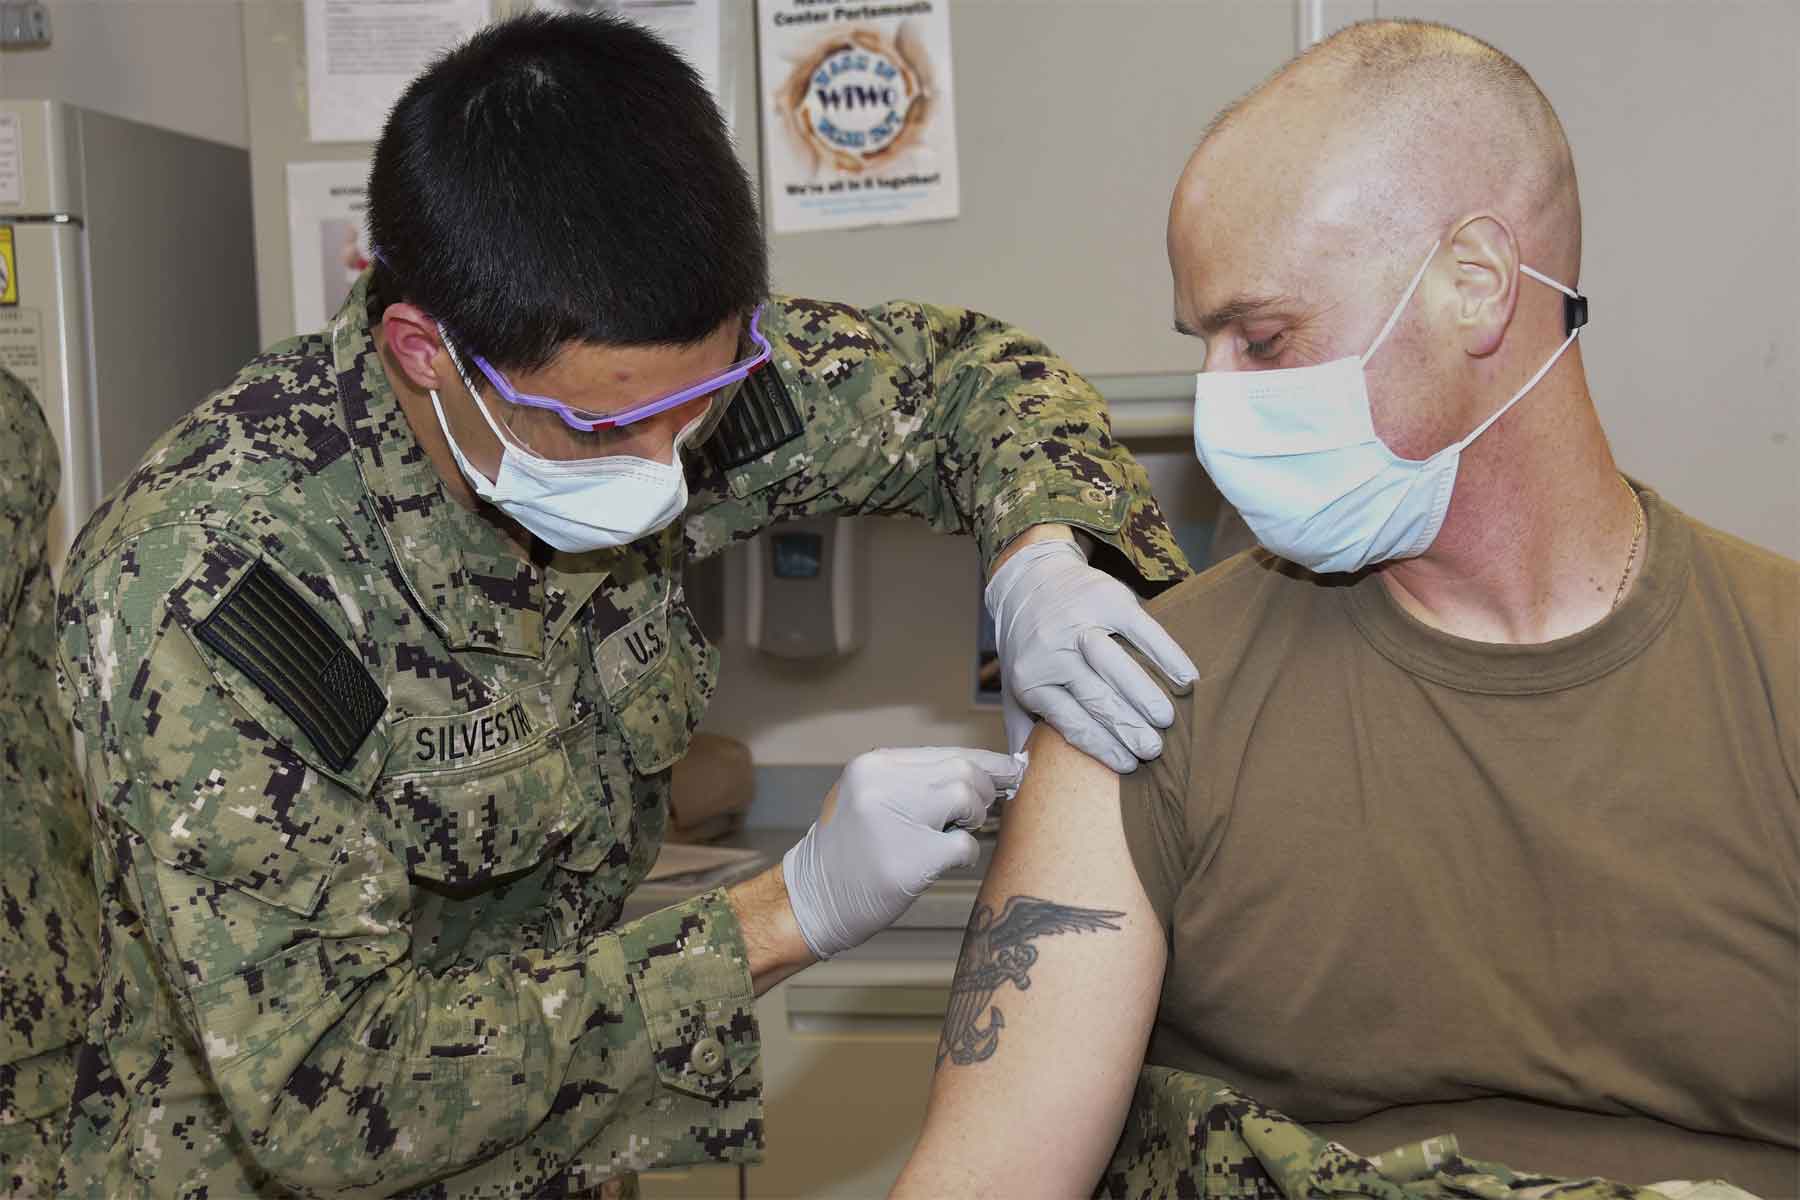 Soldier Porn Star Mike - Navy Will Make COVID-19 Vaccination Mandatory 'As Soon as We Can:' 3-Star  Admiral | Military.com